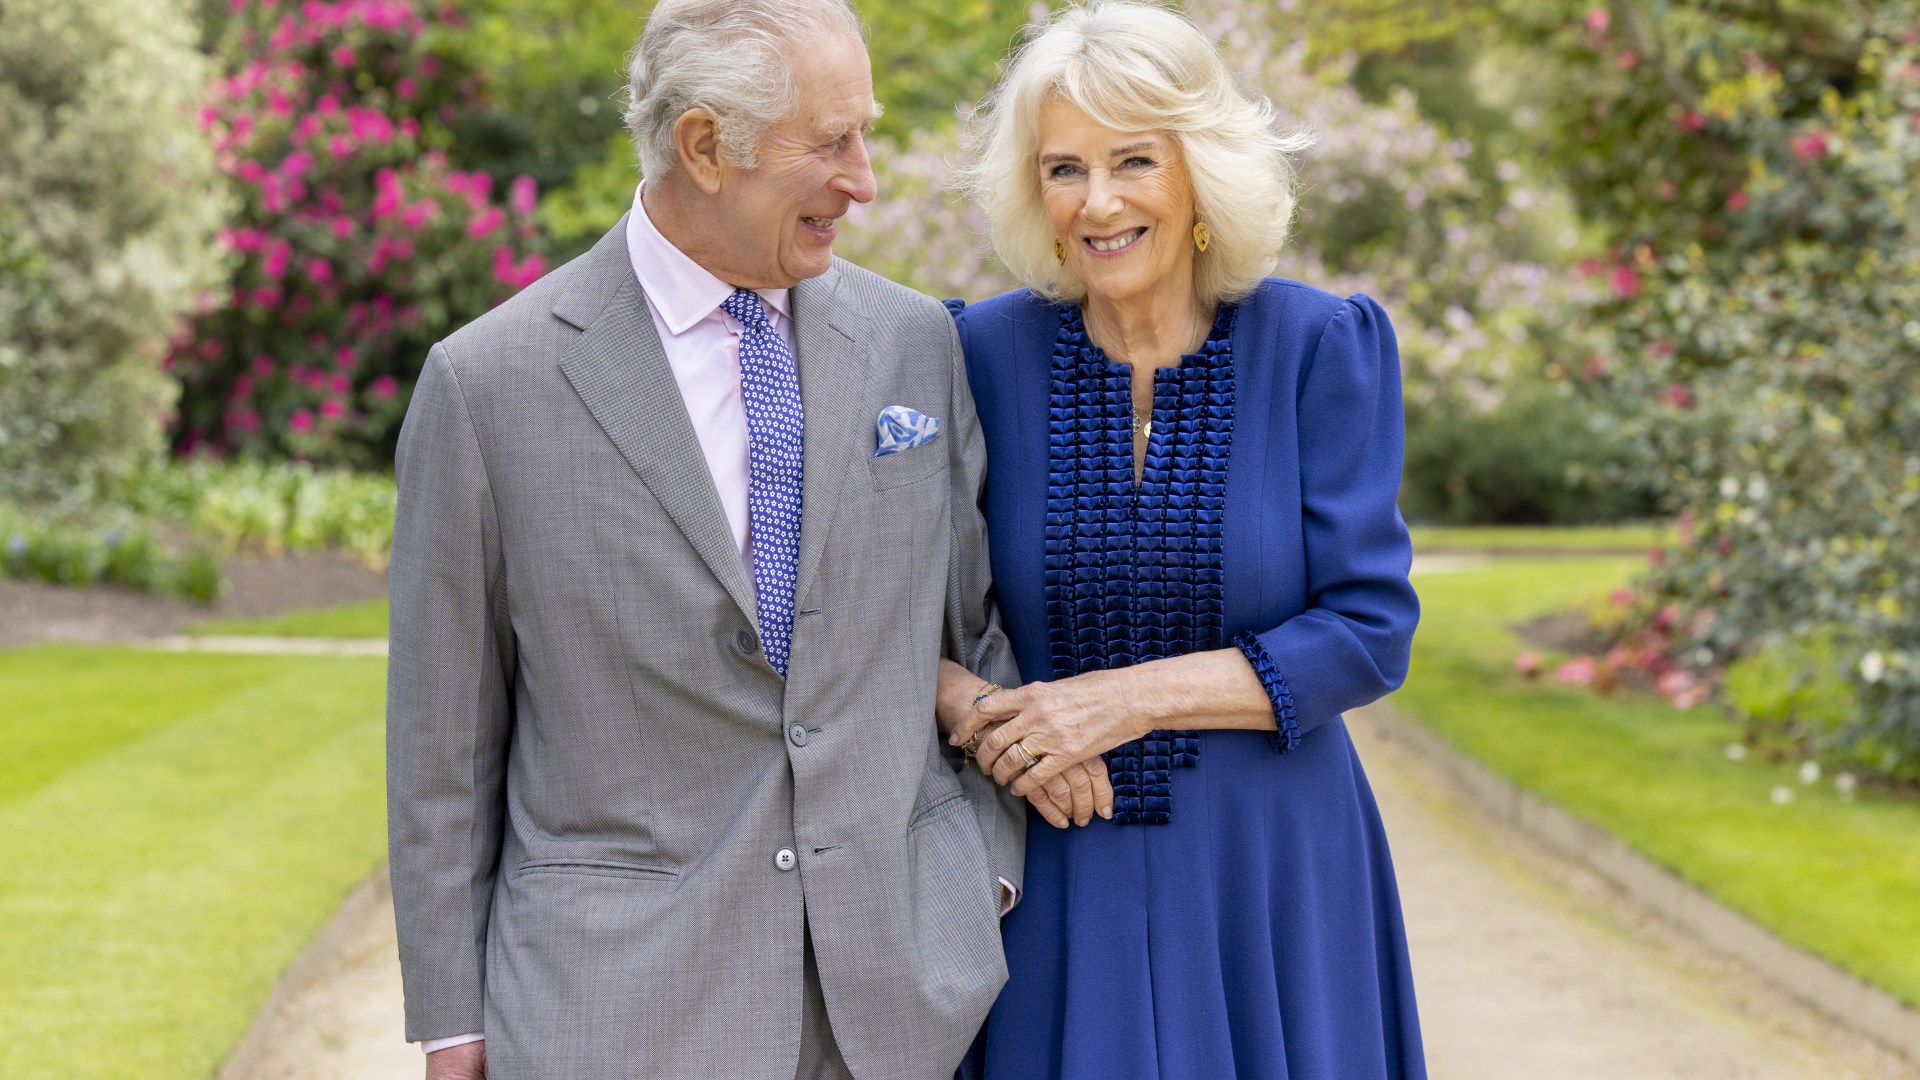 New pic of Charles & Camilla shows adoring King determined to carry on duties with his strength Queen, expert says [Video]